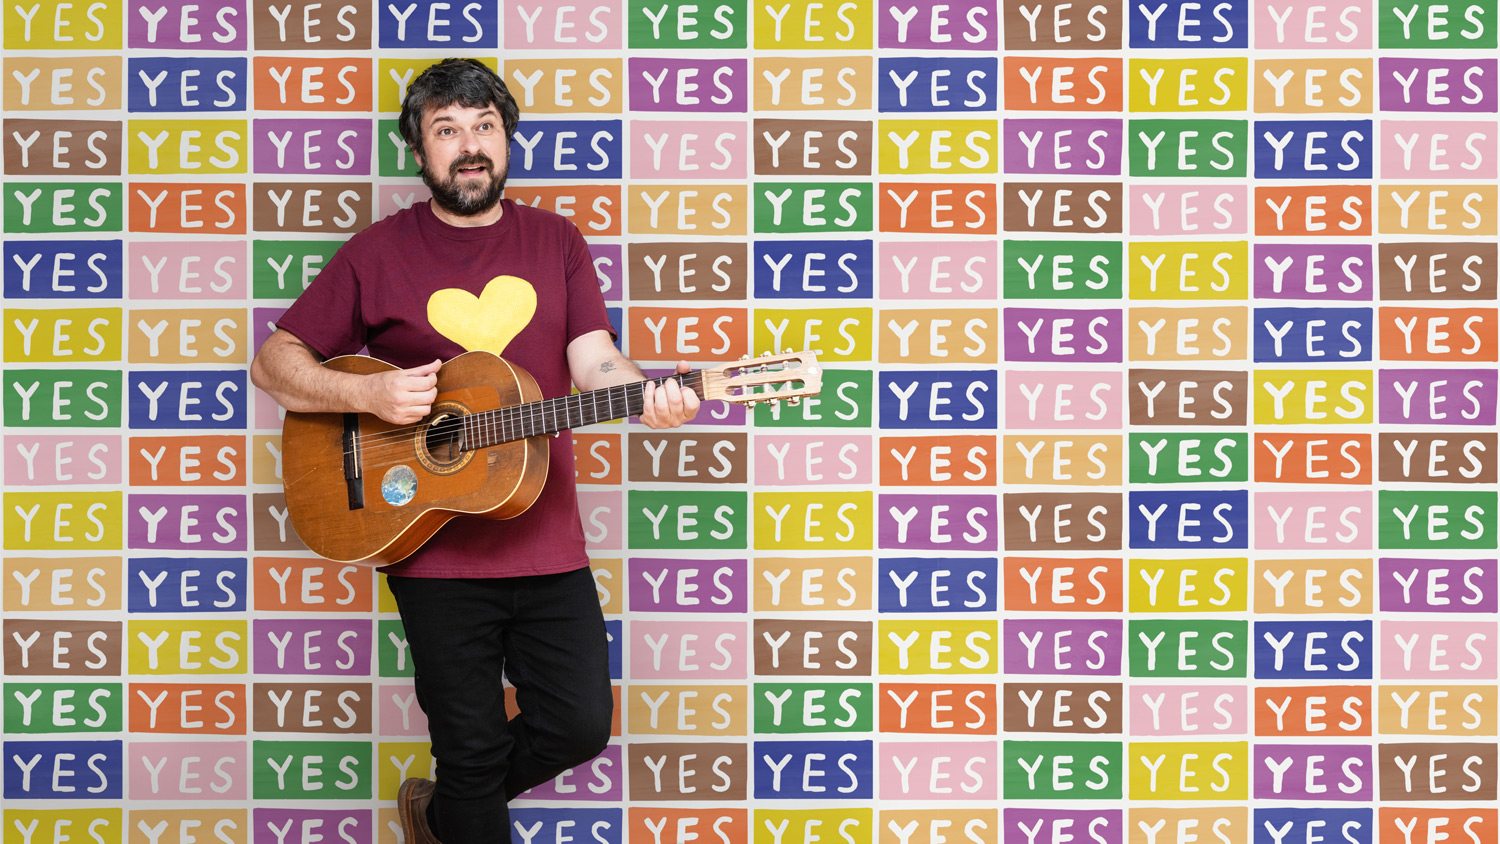 Photograph of a man with a guitar in front of a wall with the word YES repeated